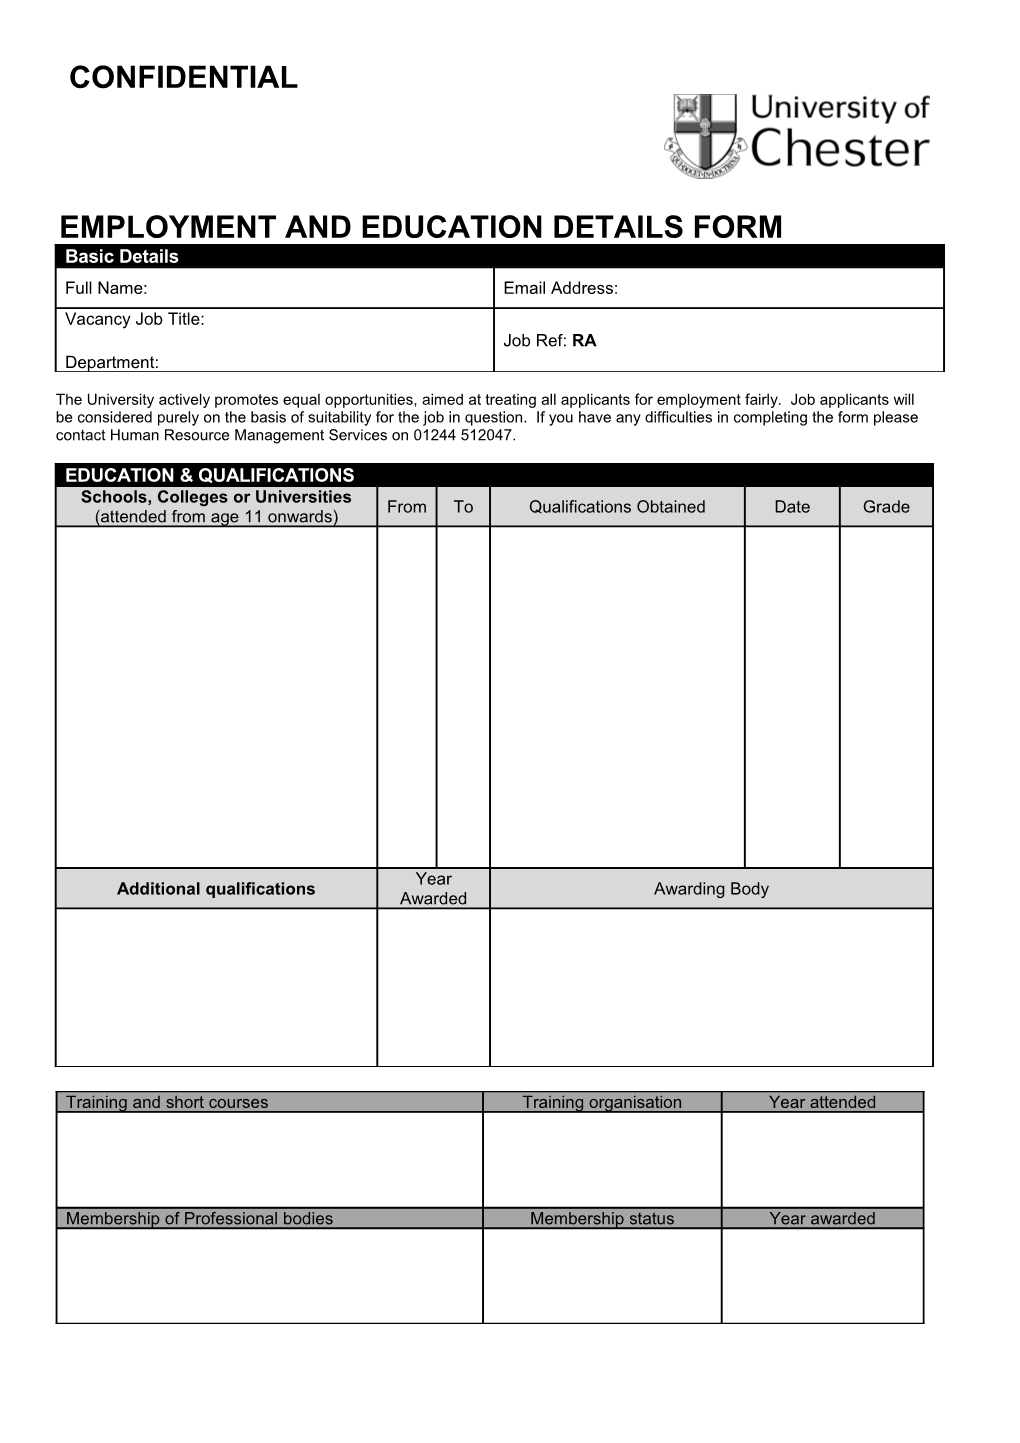 Employment and Education Details Form